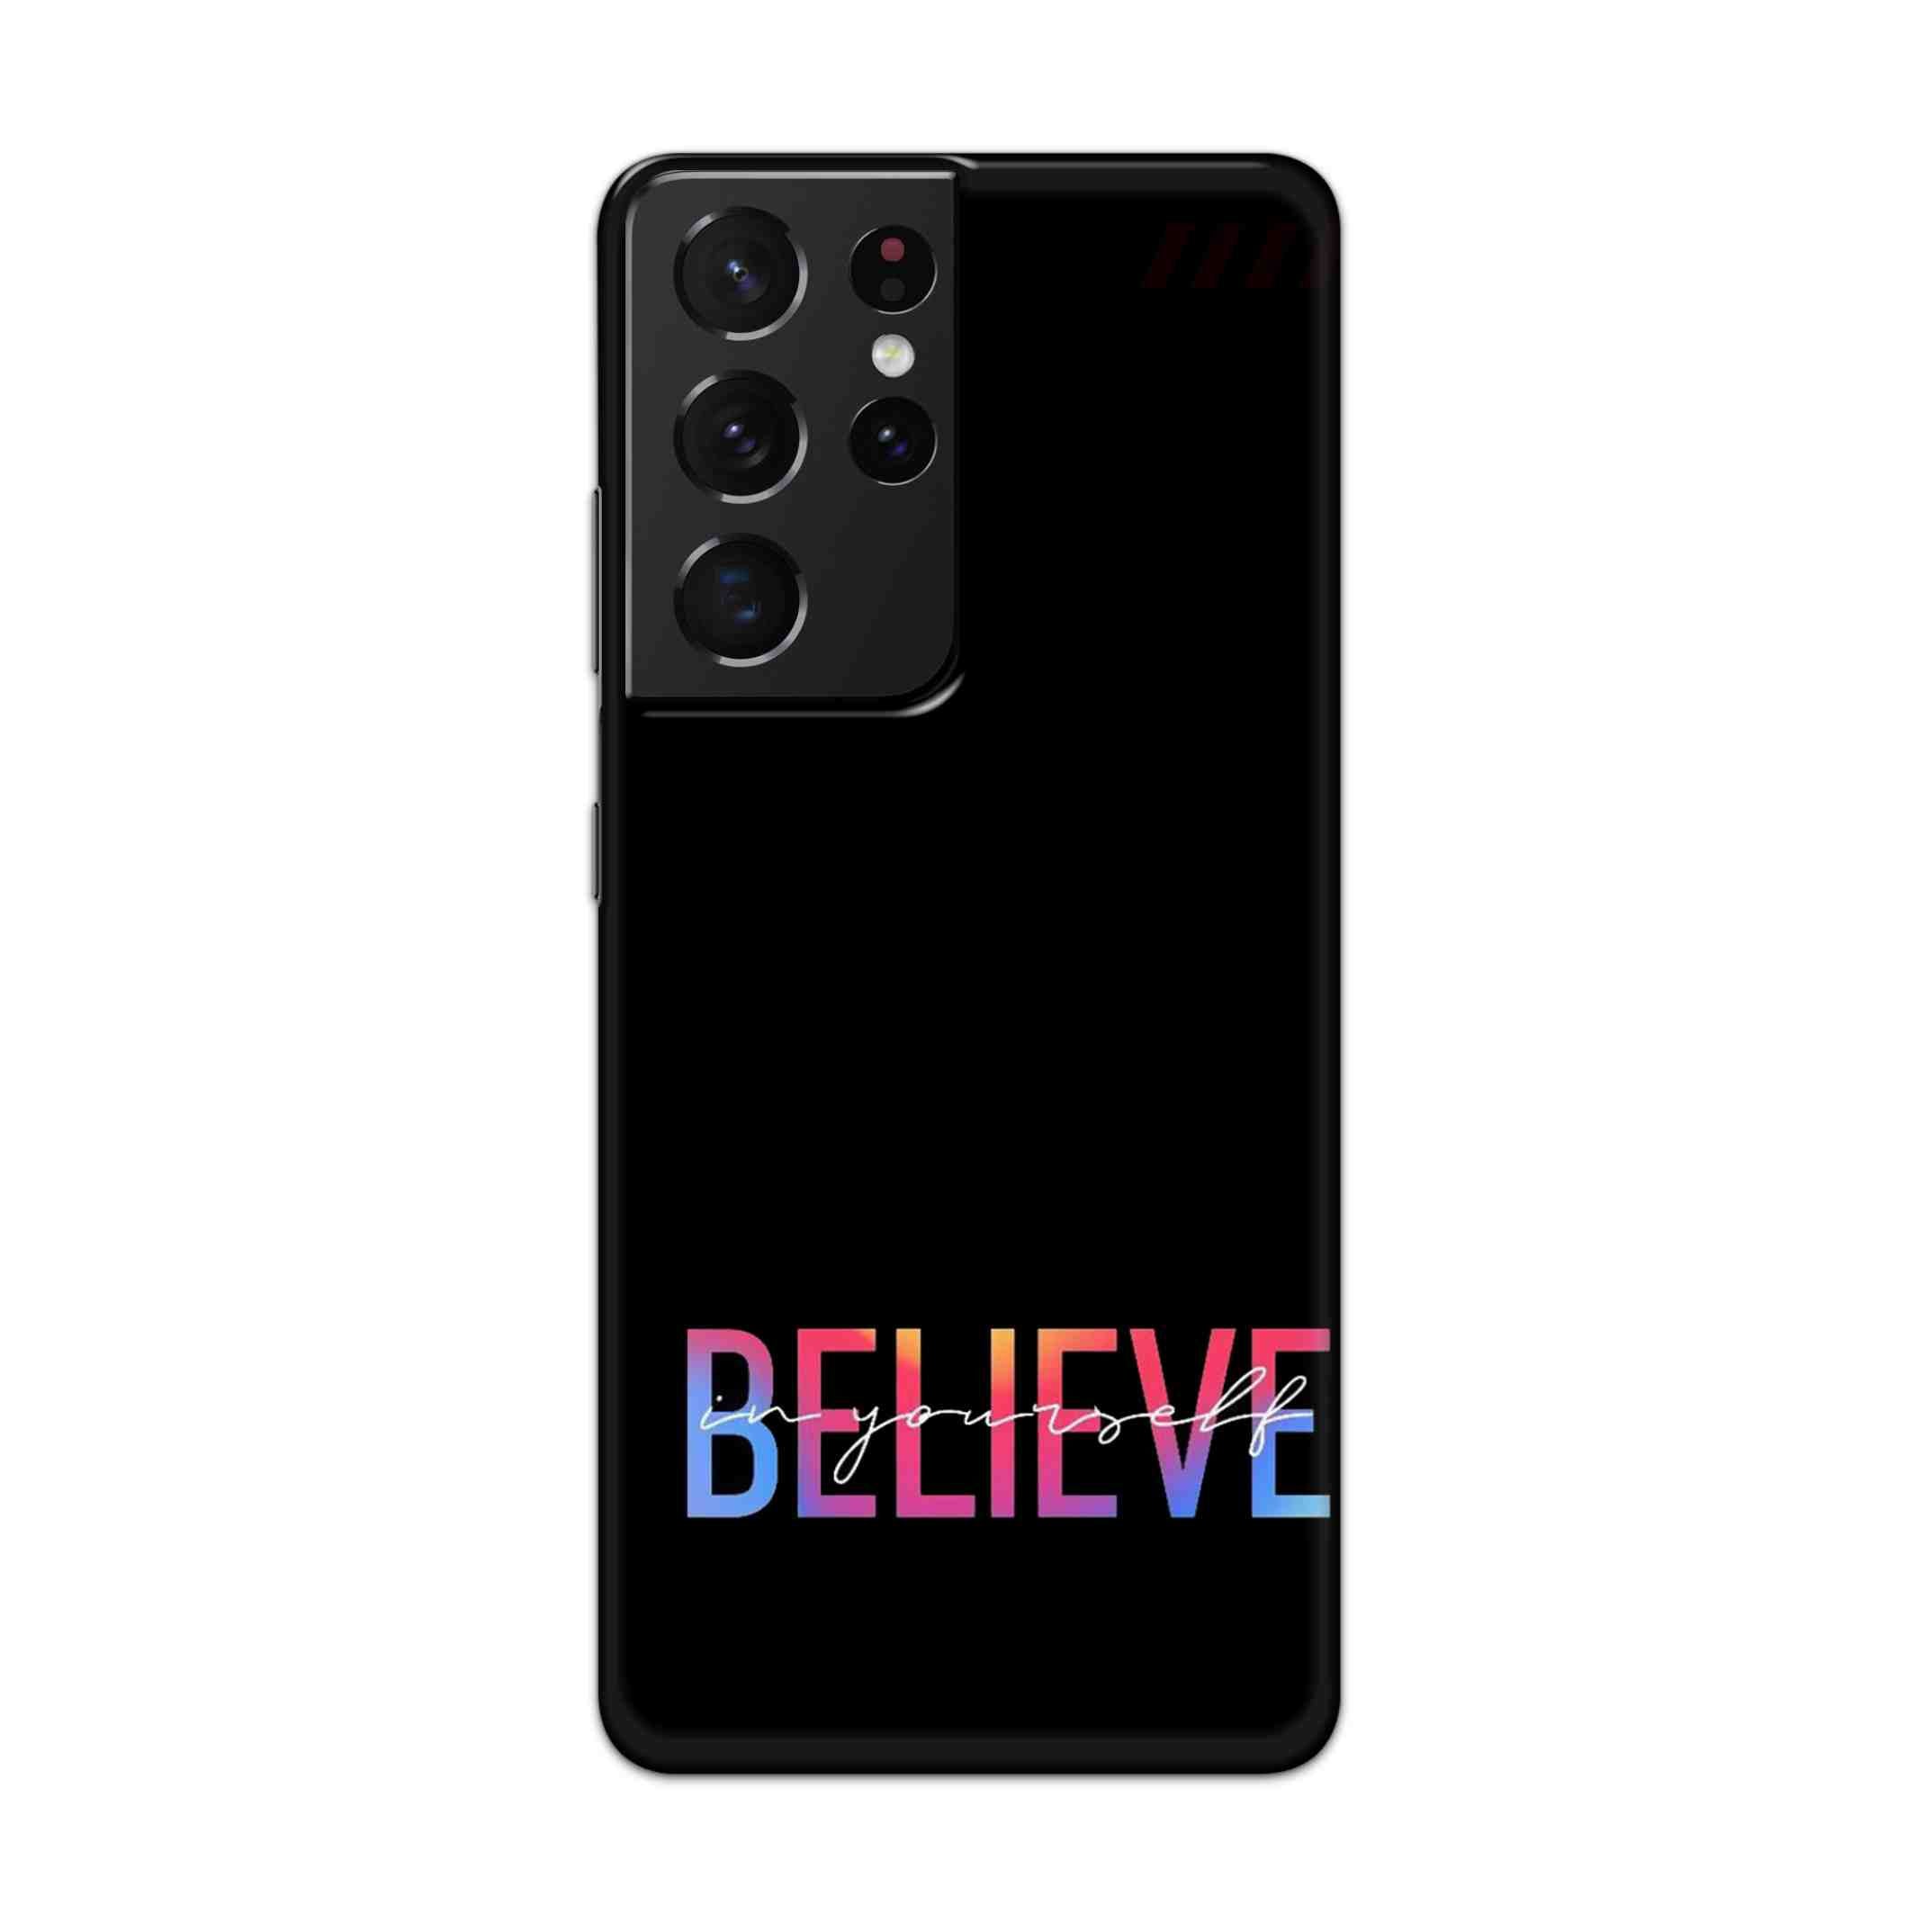 Buy Believe Hard Back Mobile Phone Case Cover For Samsung Galaxy S21 Ultra Online